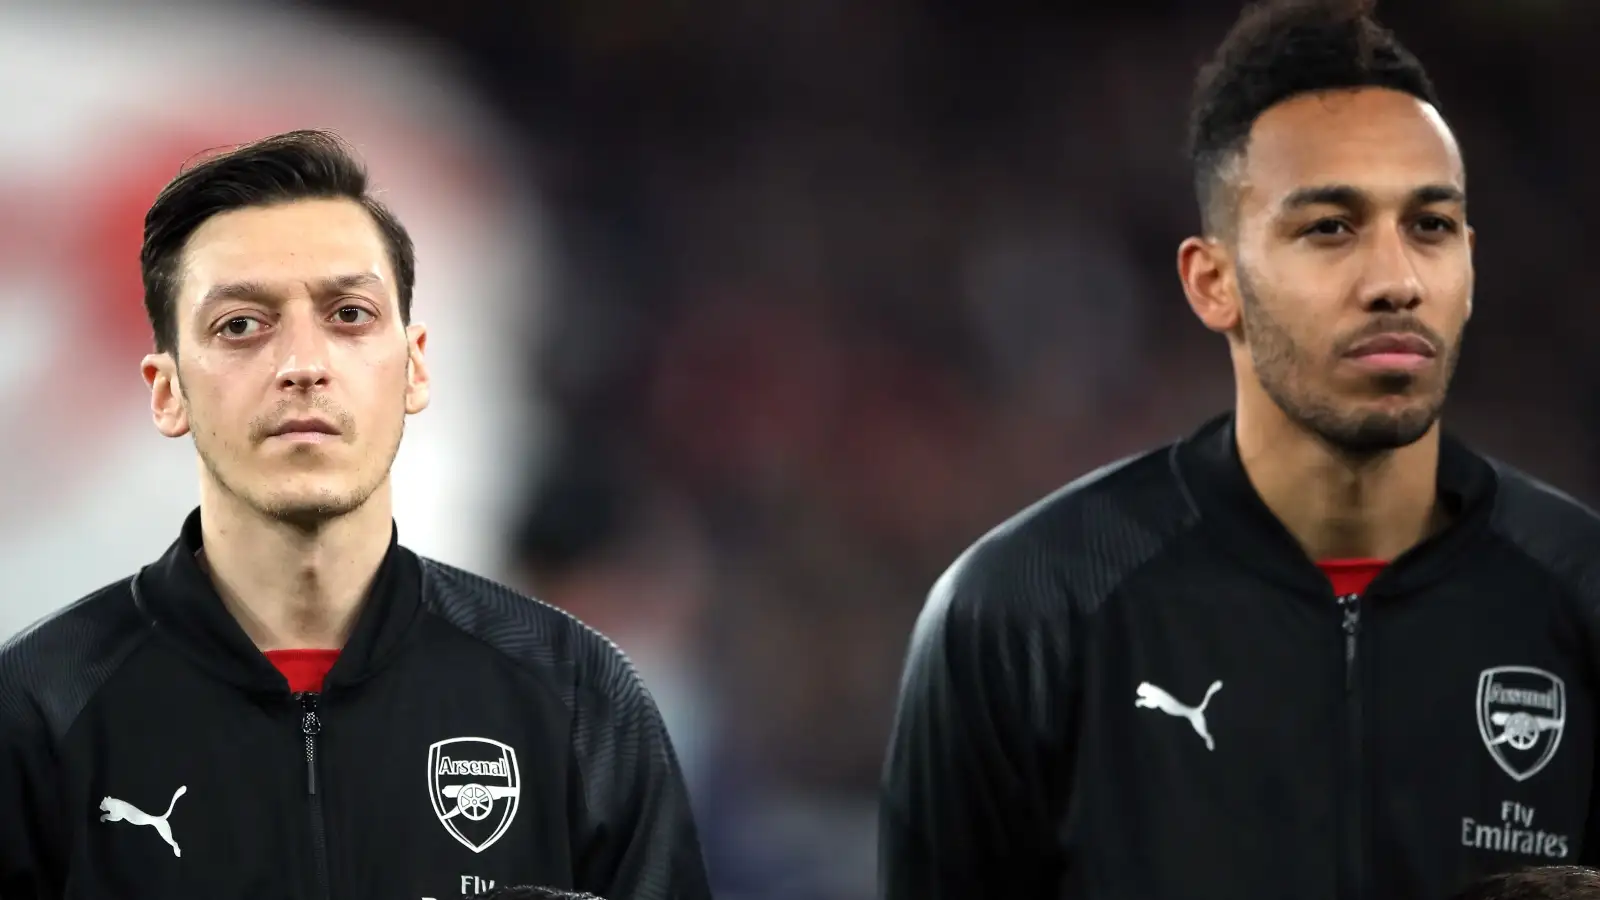 Former Arsenal duo Mesut Ozil and Pierre-Emerick Aubameyang line up before a match